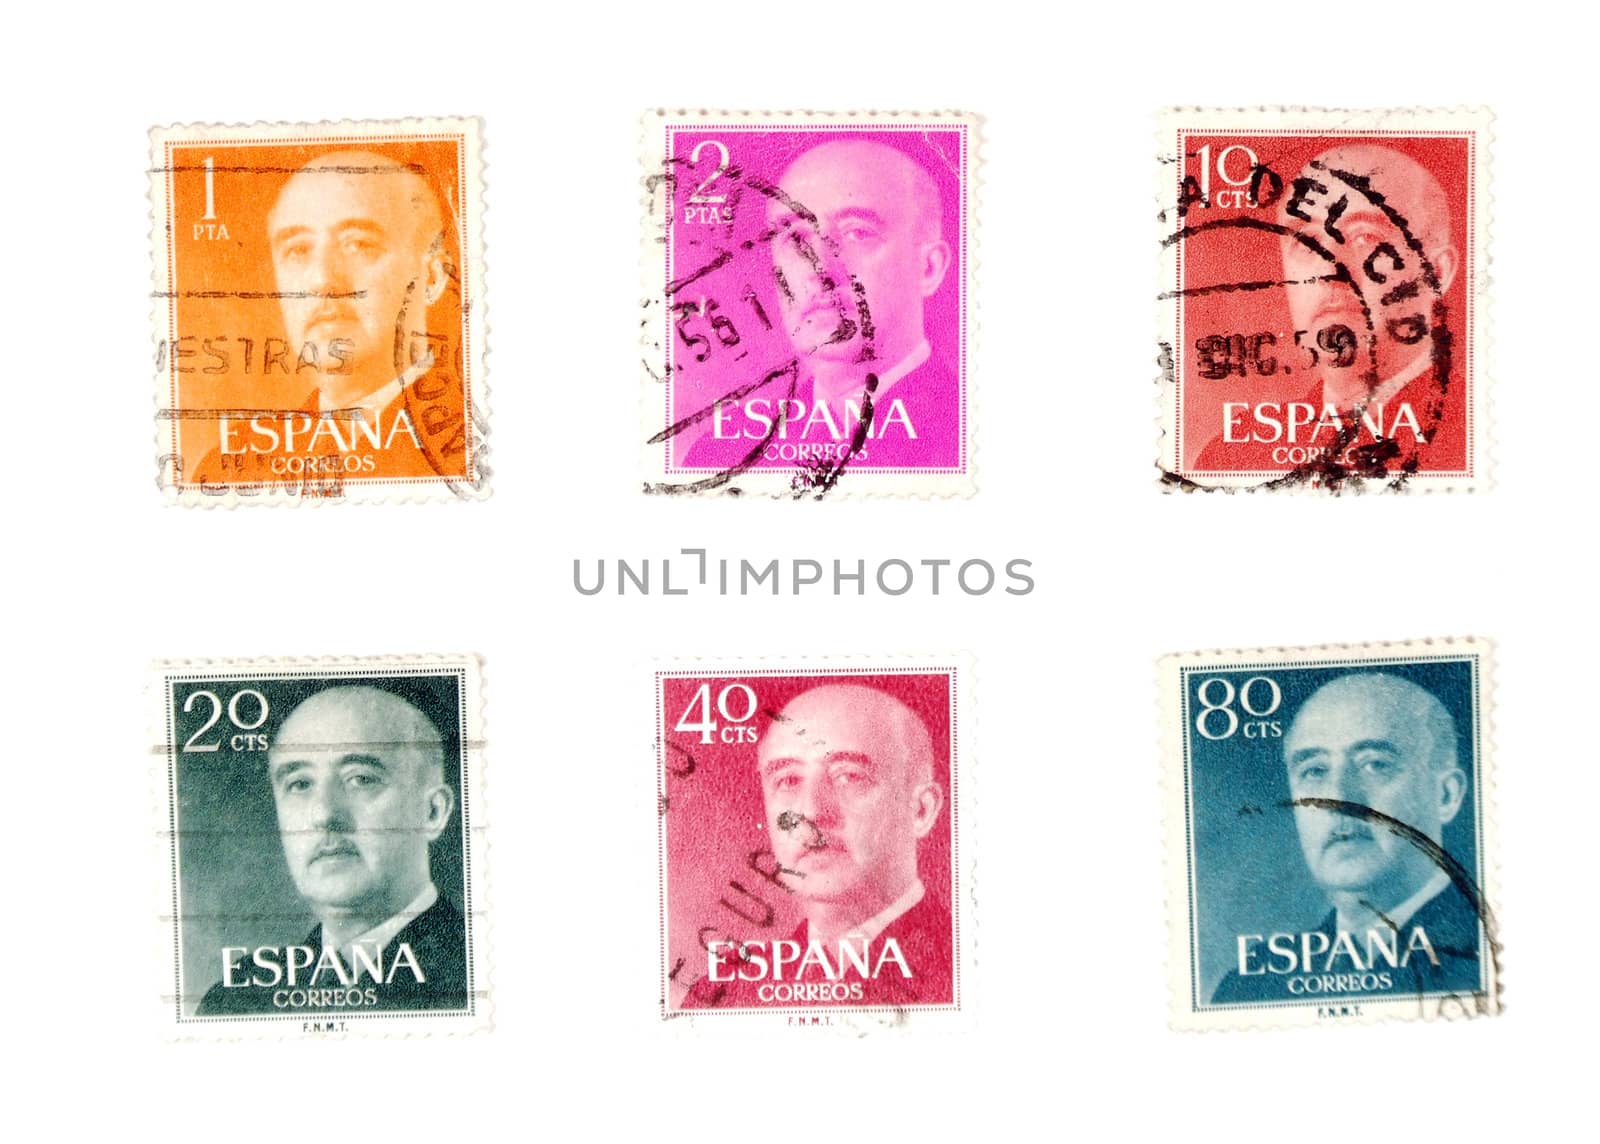 Vintage postage stamps collection. Spanish mail. Post stamps with portraits.